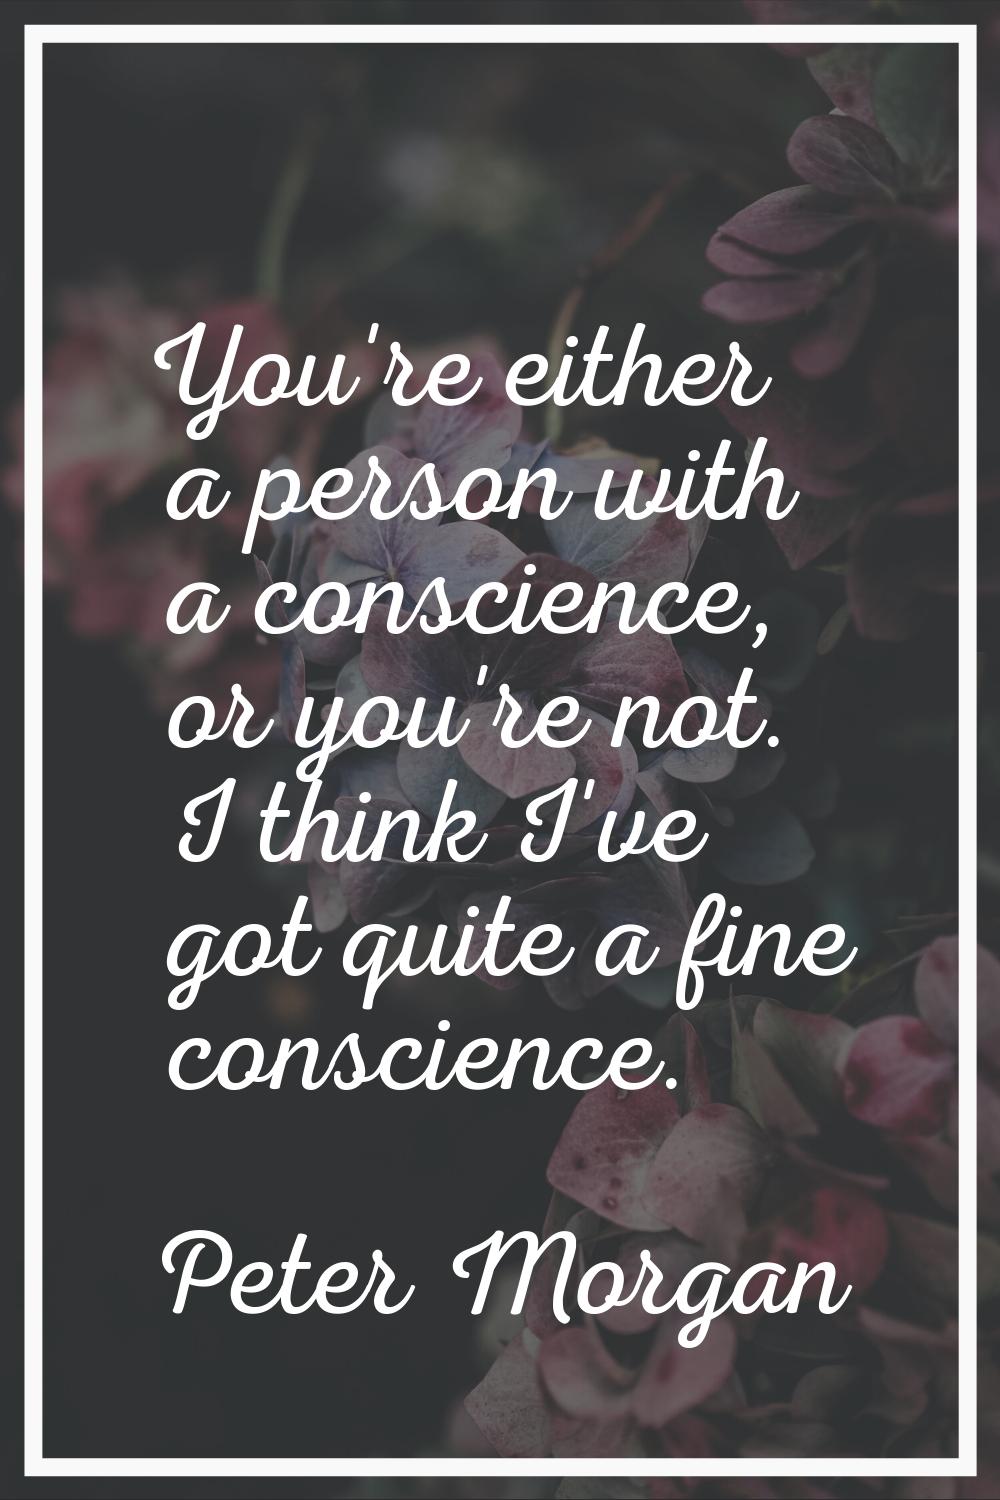 You're either a person with a conscience, or you're not. I think I've got quite a fine conscience.